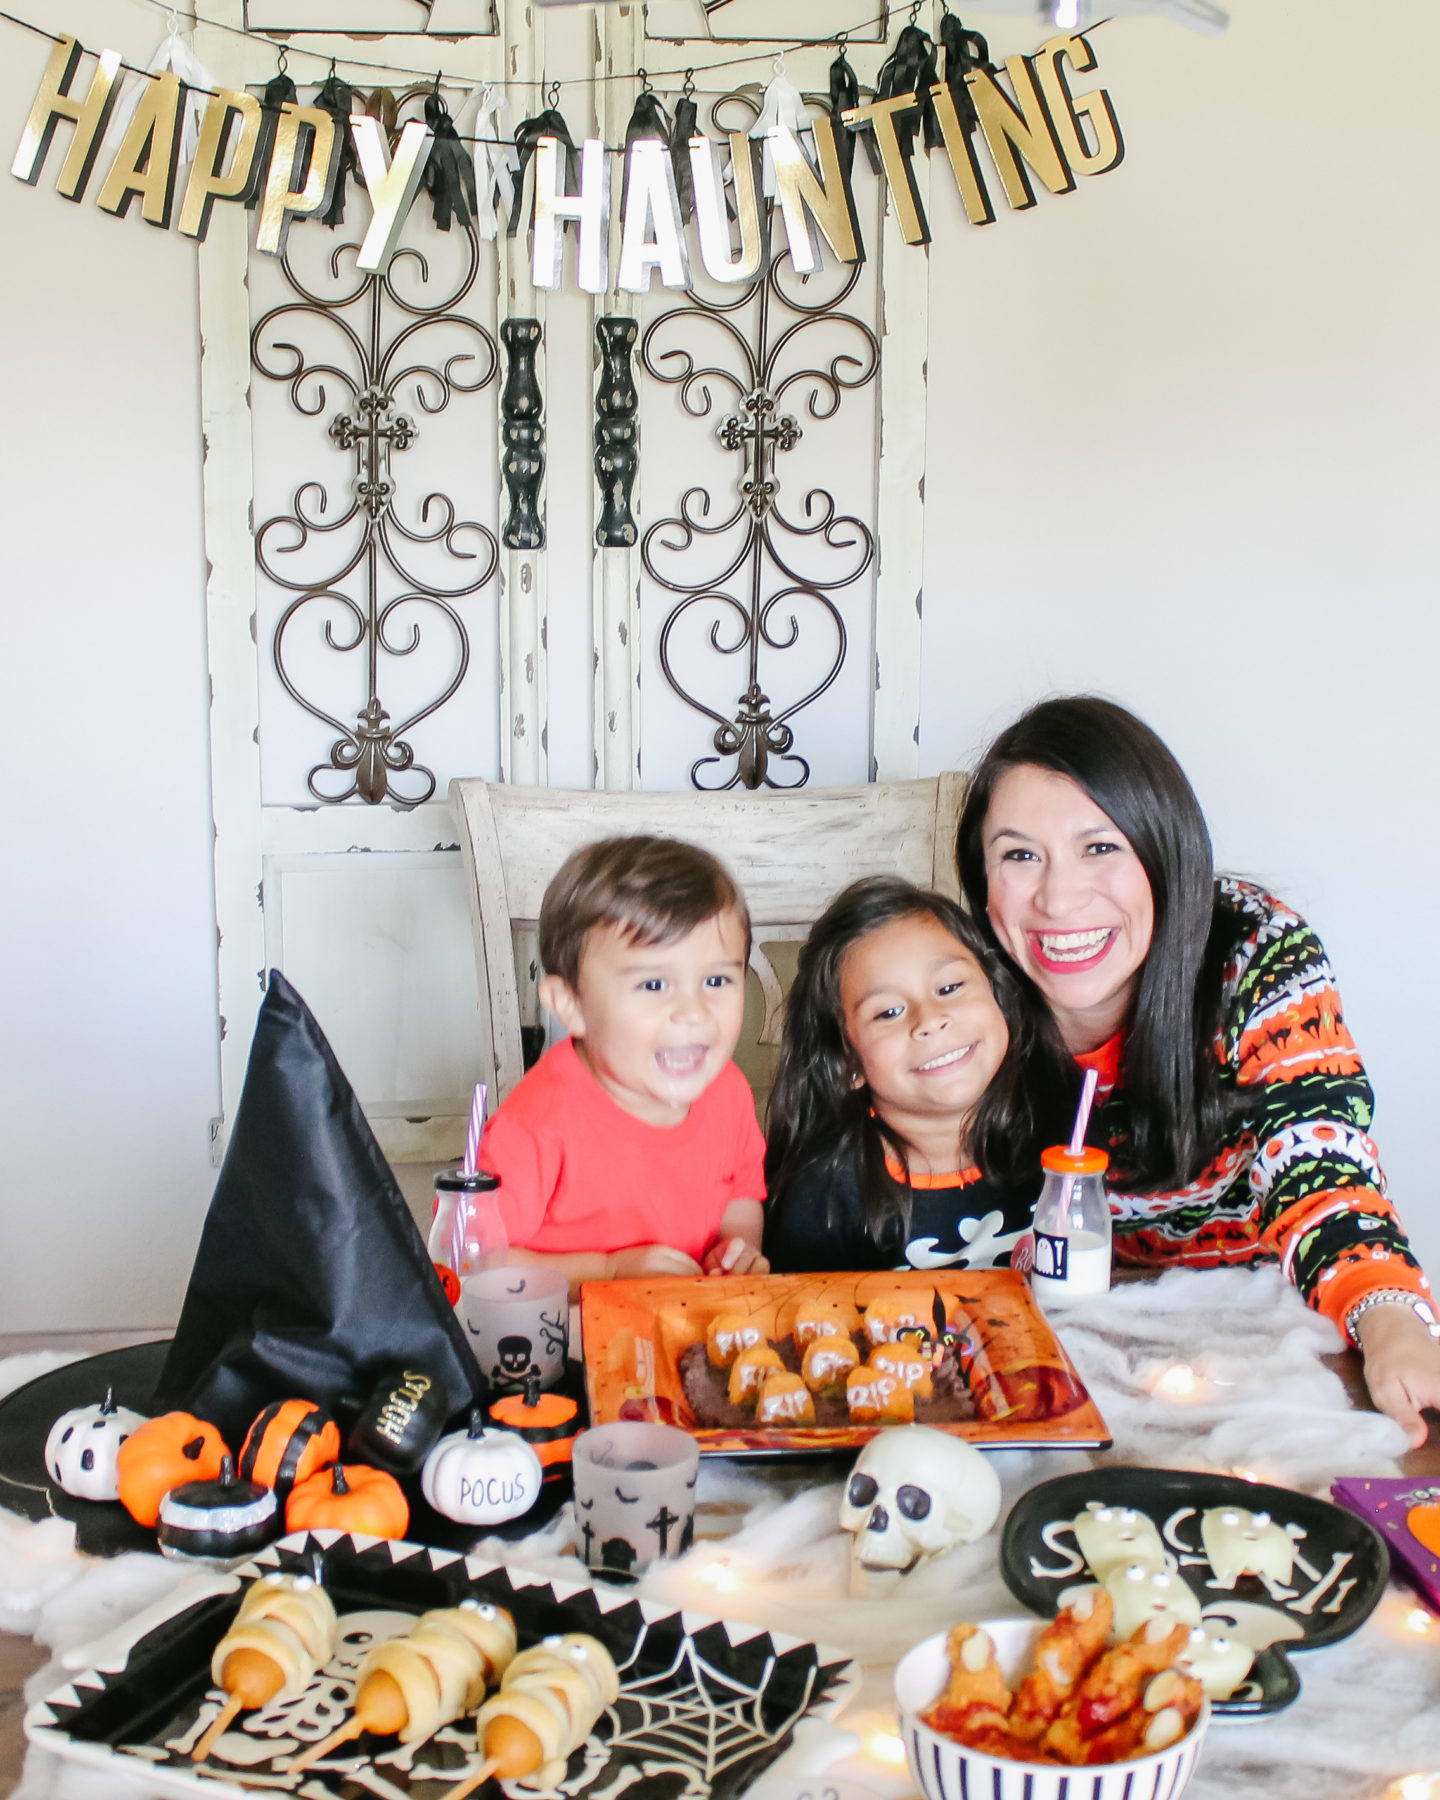 Cutest Halloween Party Ideas. Recreate your own ghoulish party spread with all of these @TysonBrand products available at your local Walmart! srcset=